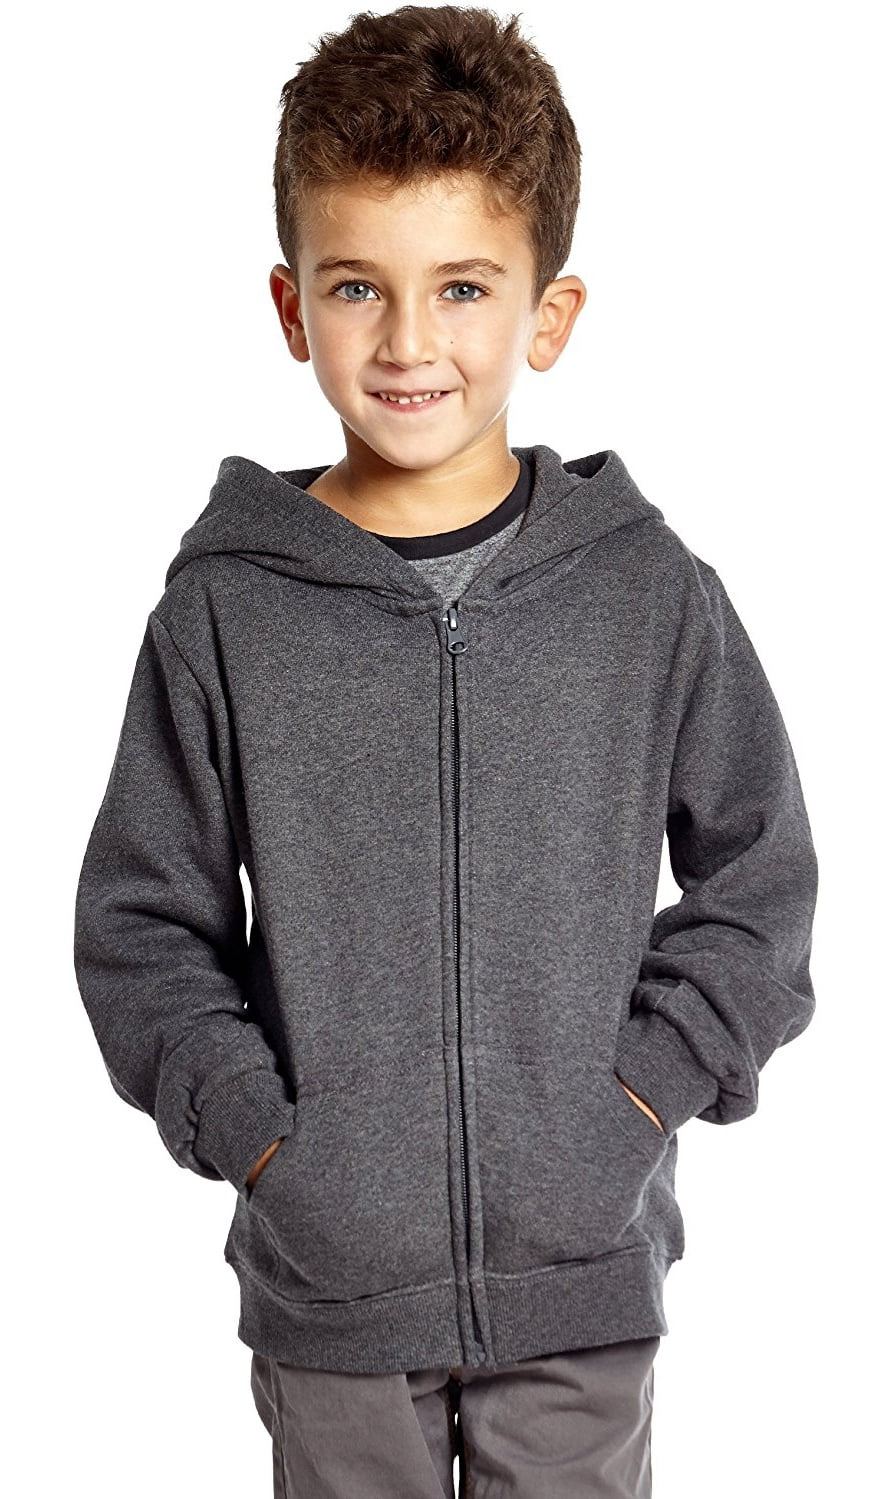 Fleece Pull Over Sweatshirt for Boys Girls Kids Youth Percussion Unisex Toddler Hoodies